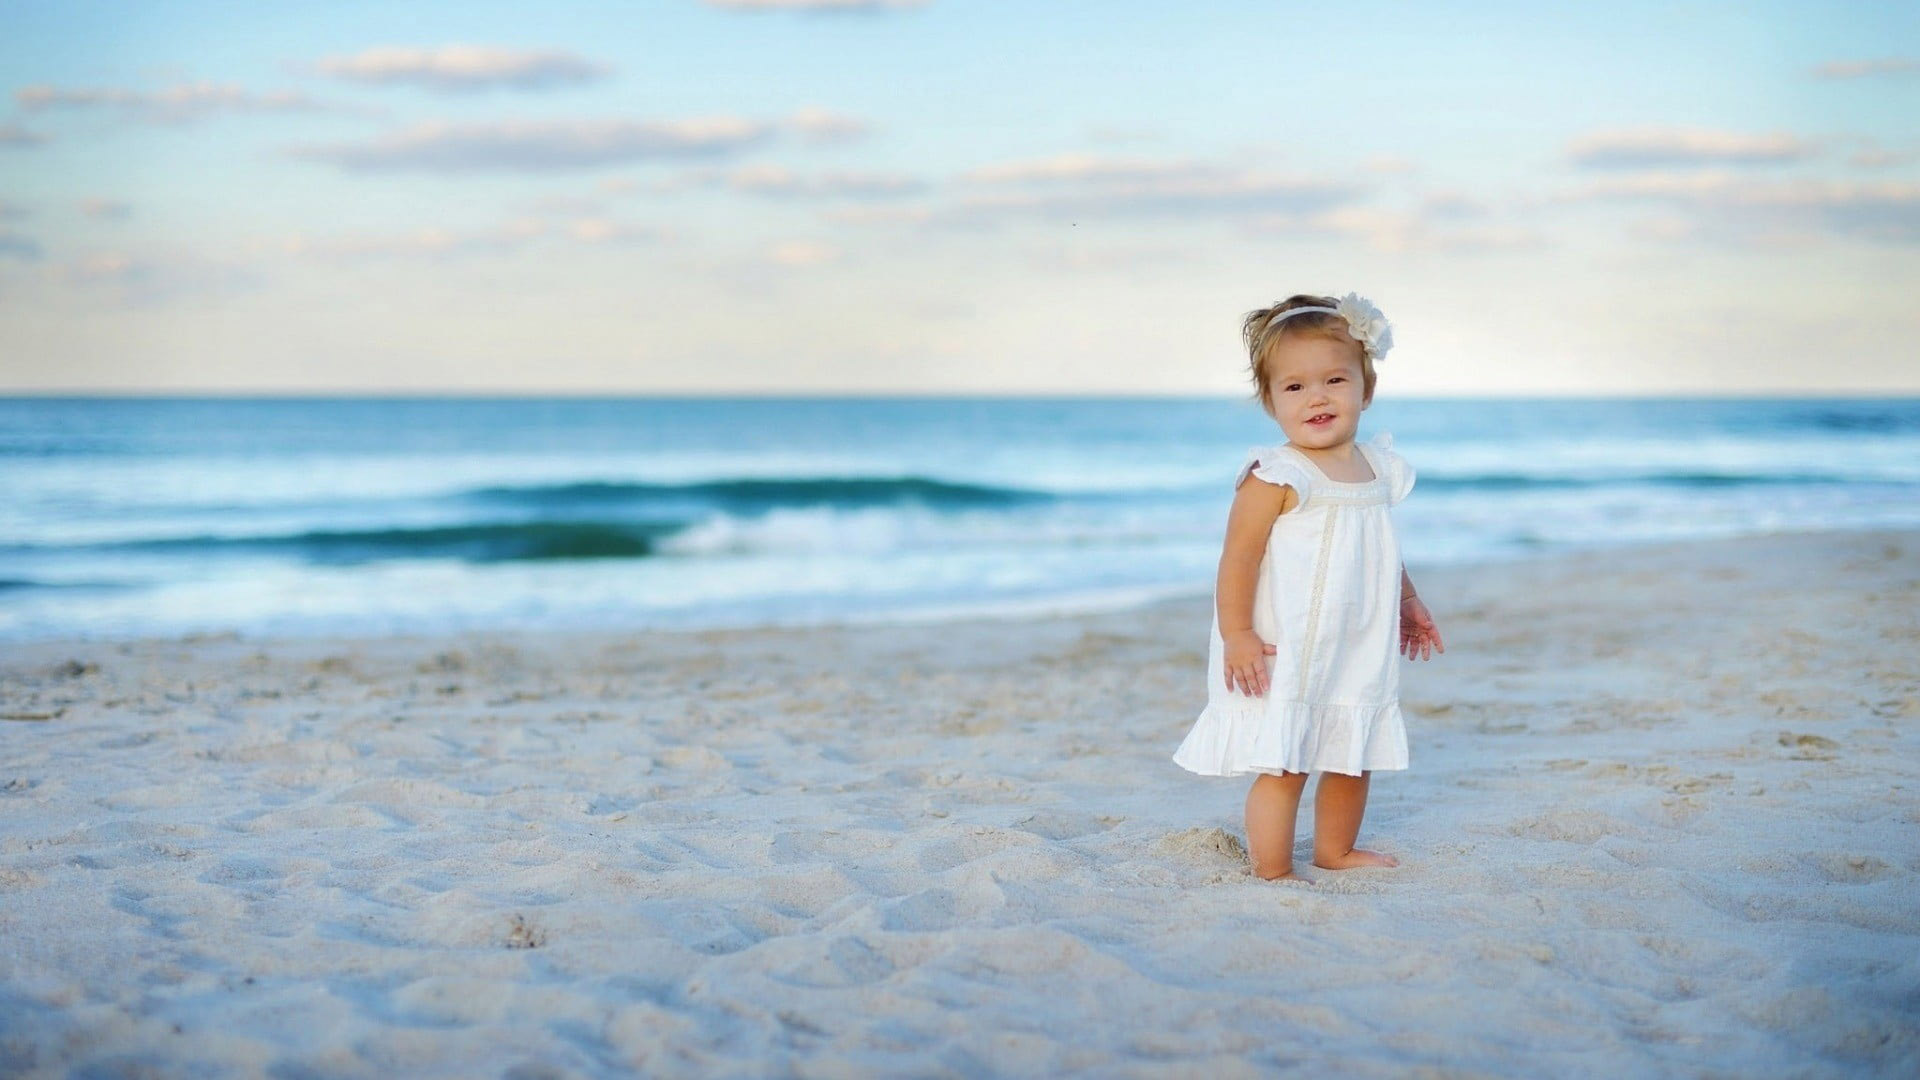 Cute Baby Child Is Standing On Beach Sand Wearing White Dress Under Blue Sky 2K Cute